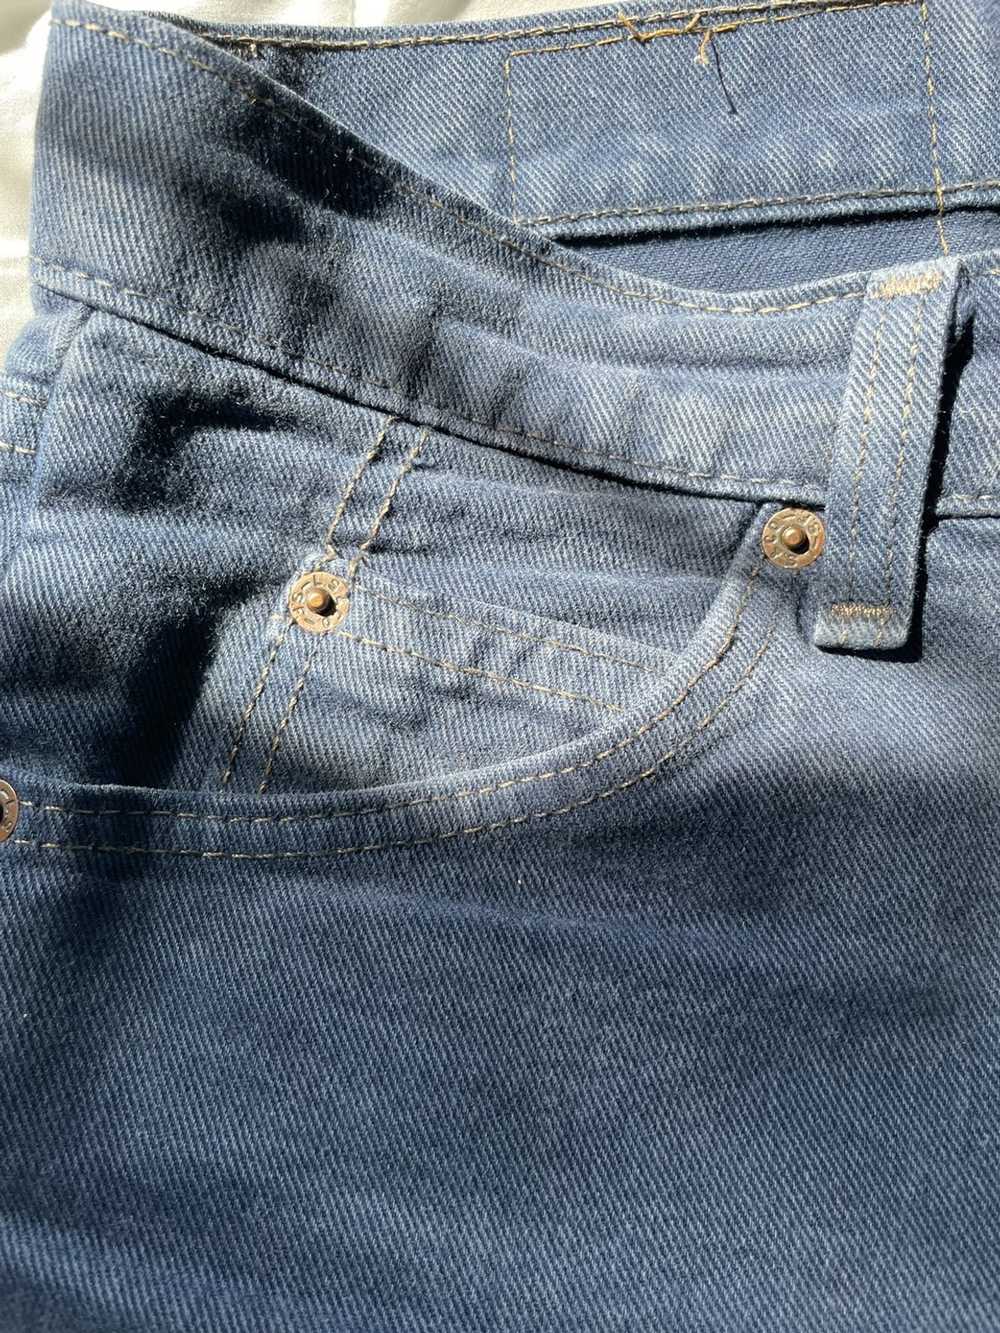 Levi's Vintage 550 relaxed fit jean - image 4